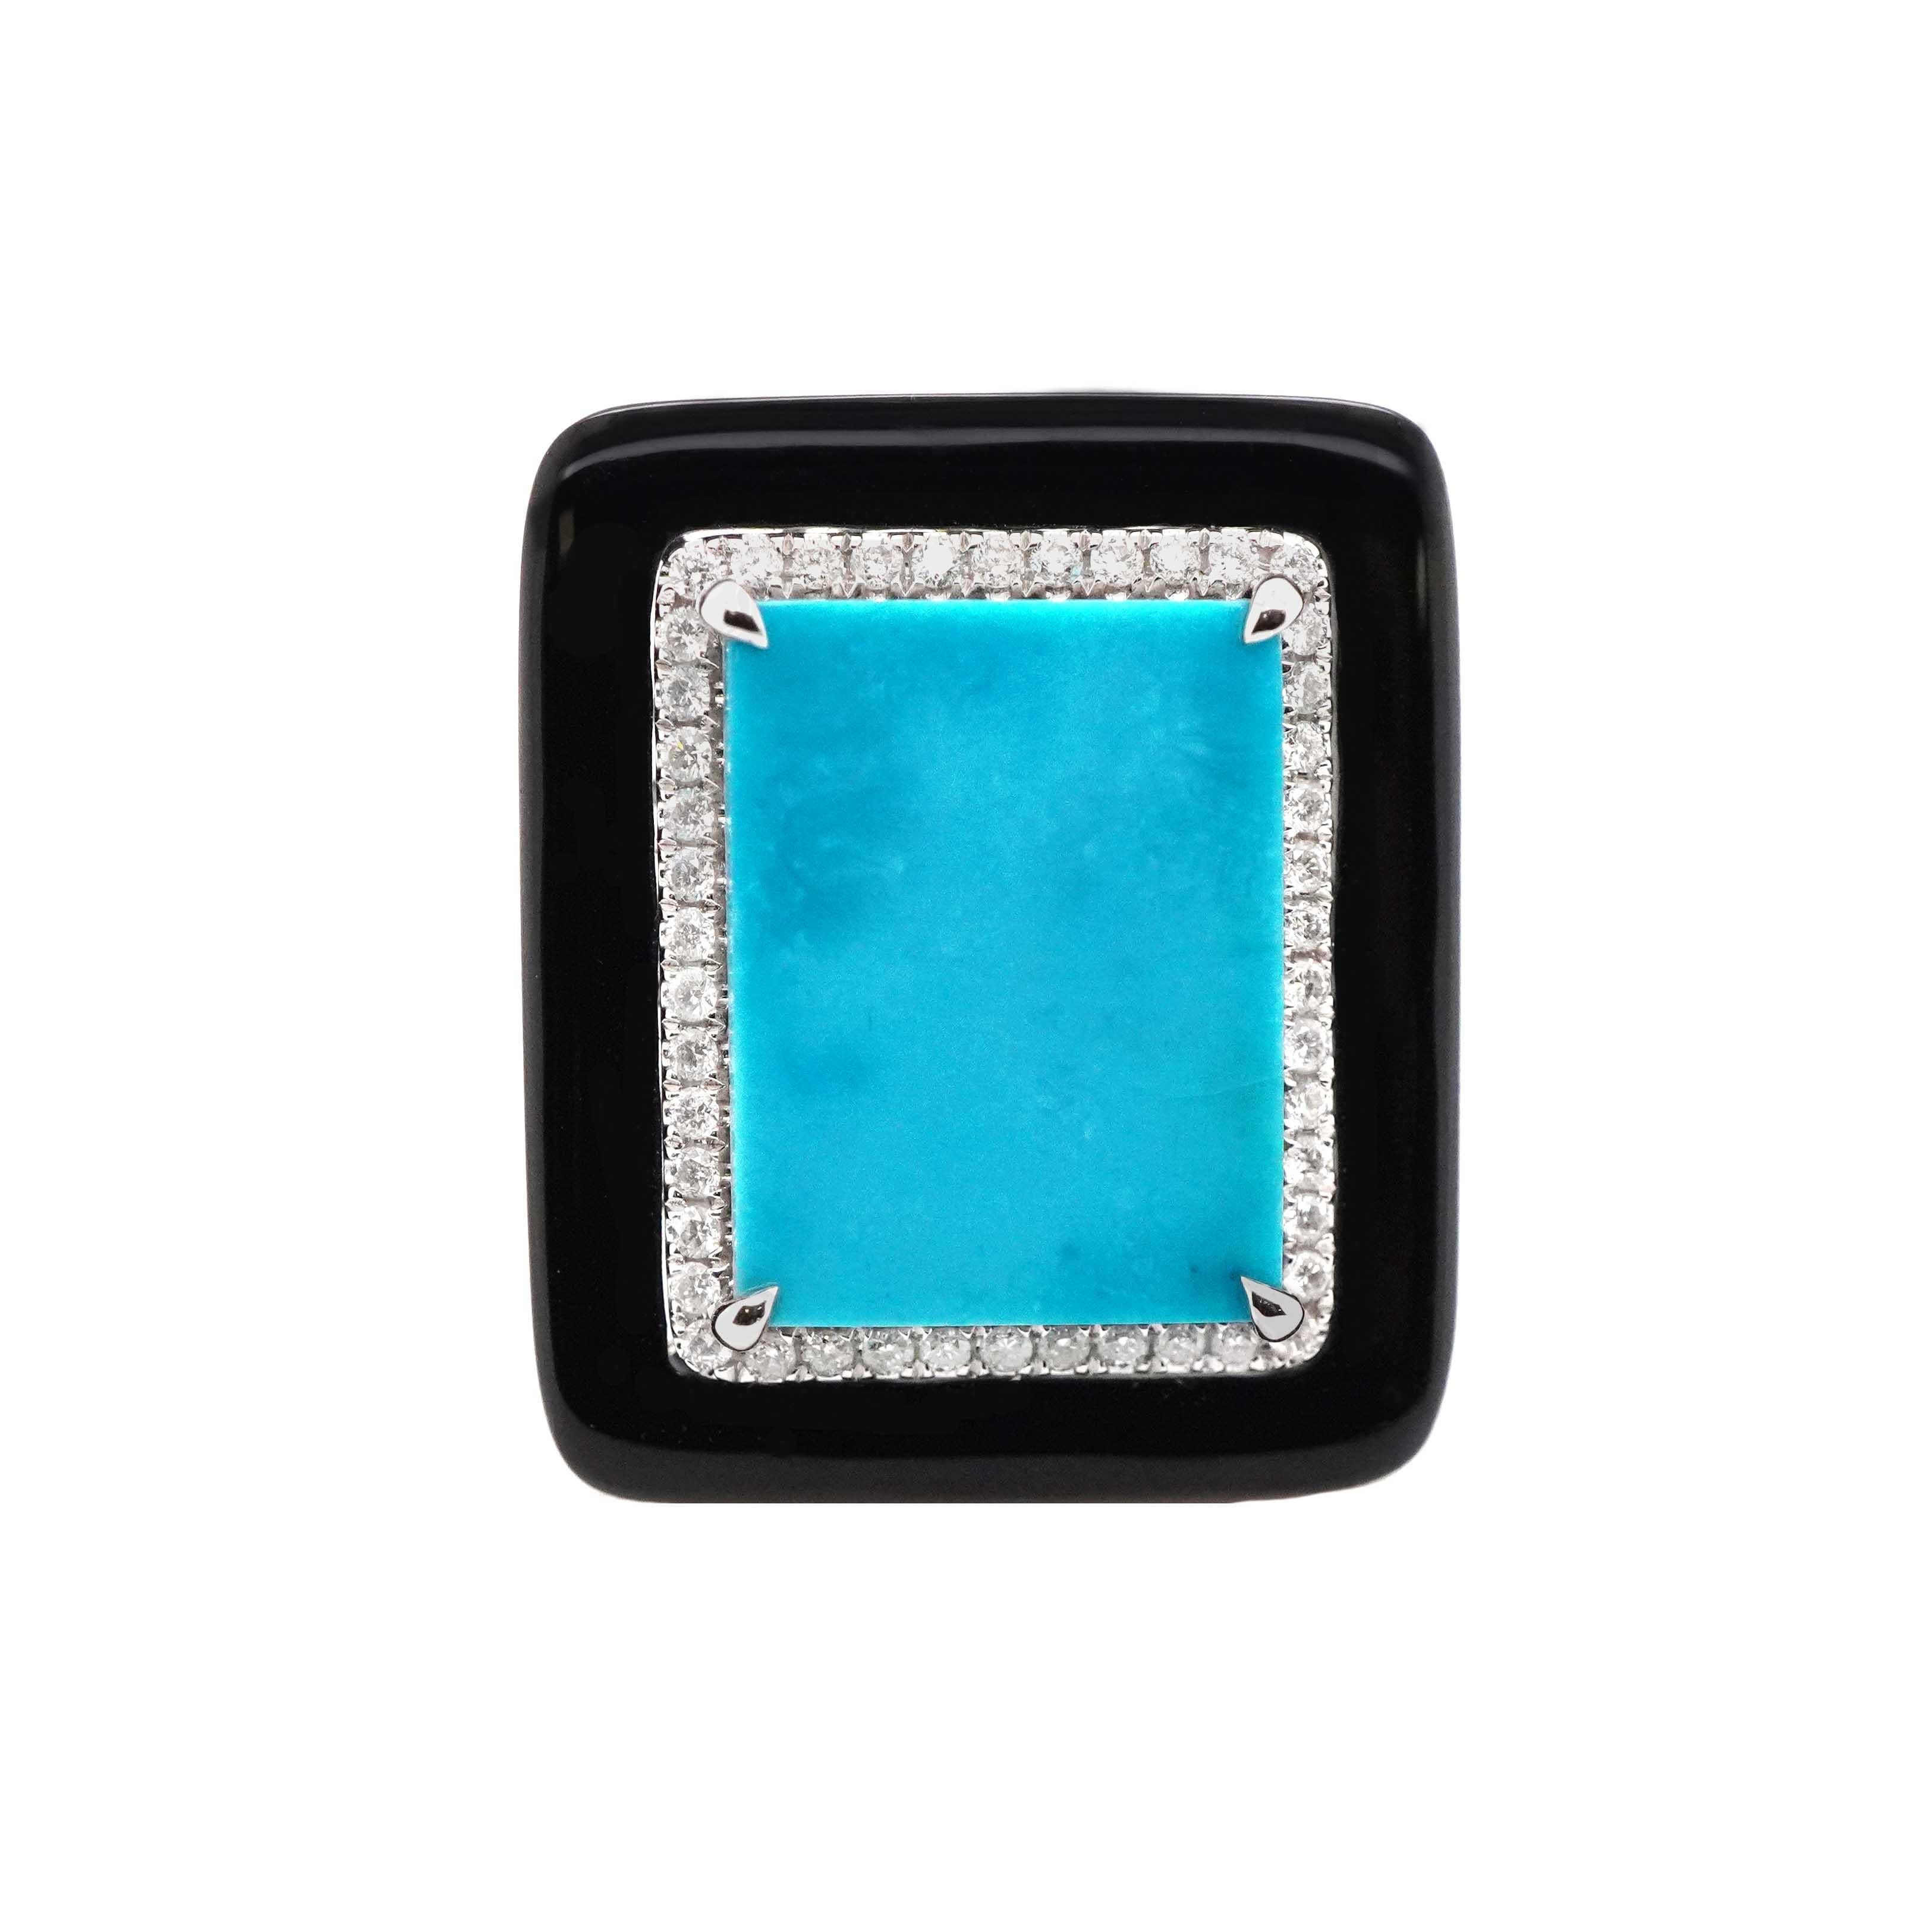 A soothing 9.97 carat of Turquoise is set along with 6.30 carat Onyx and 0.33 Carats of white round brilliant diamond. The details of the diamond are mentioned below:
Color: F
Clarity: Vs
Ring Size: US 6
Turquoise is perhaps the oldest stone in